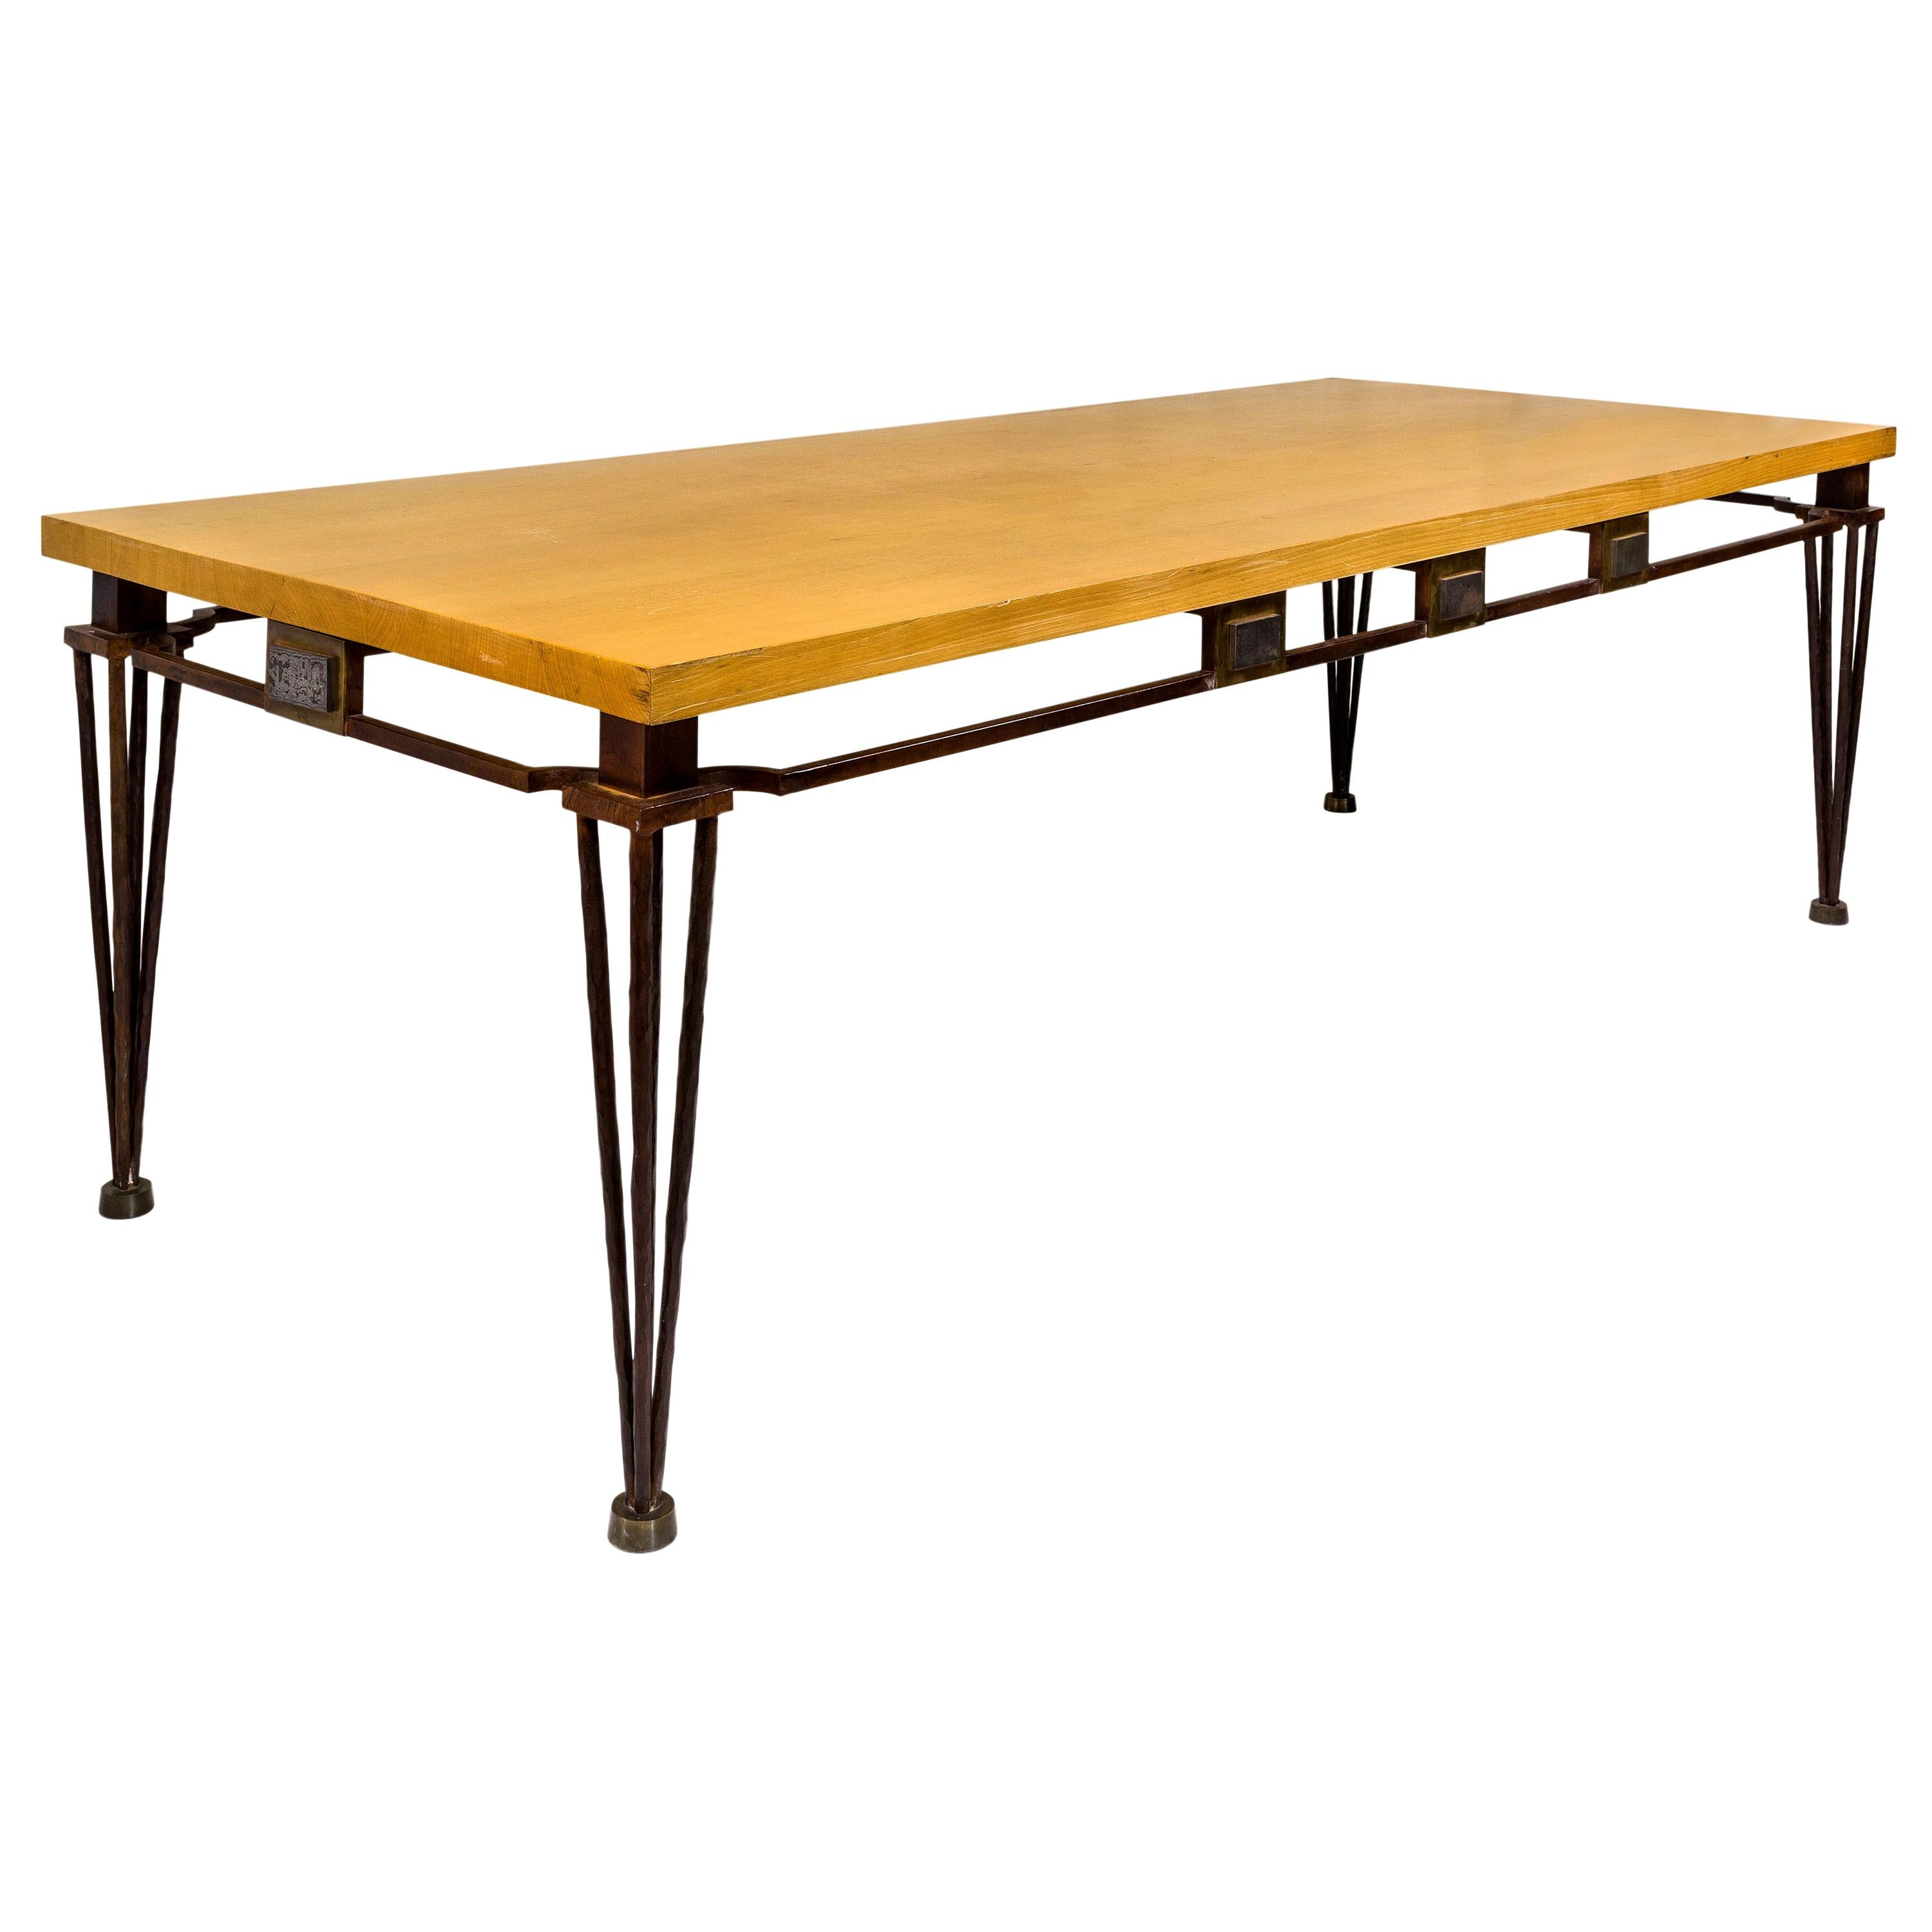 Jean Louis Hurlin Hammered Iron Dining Table, circa 1980, France